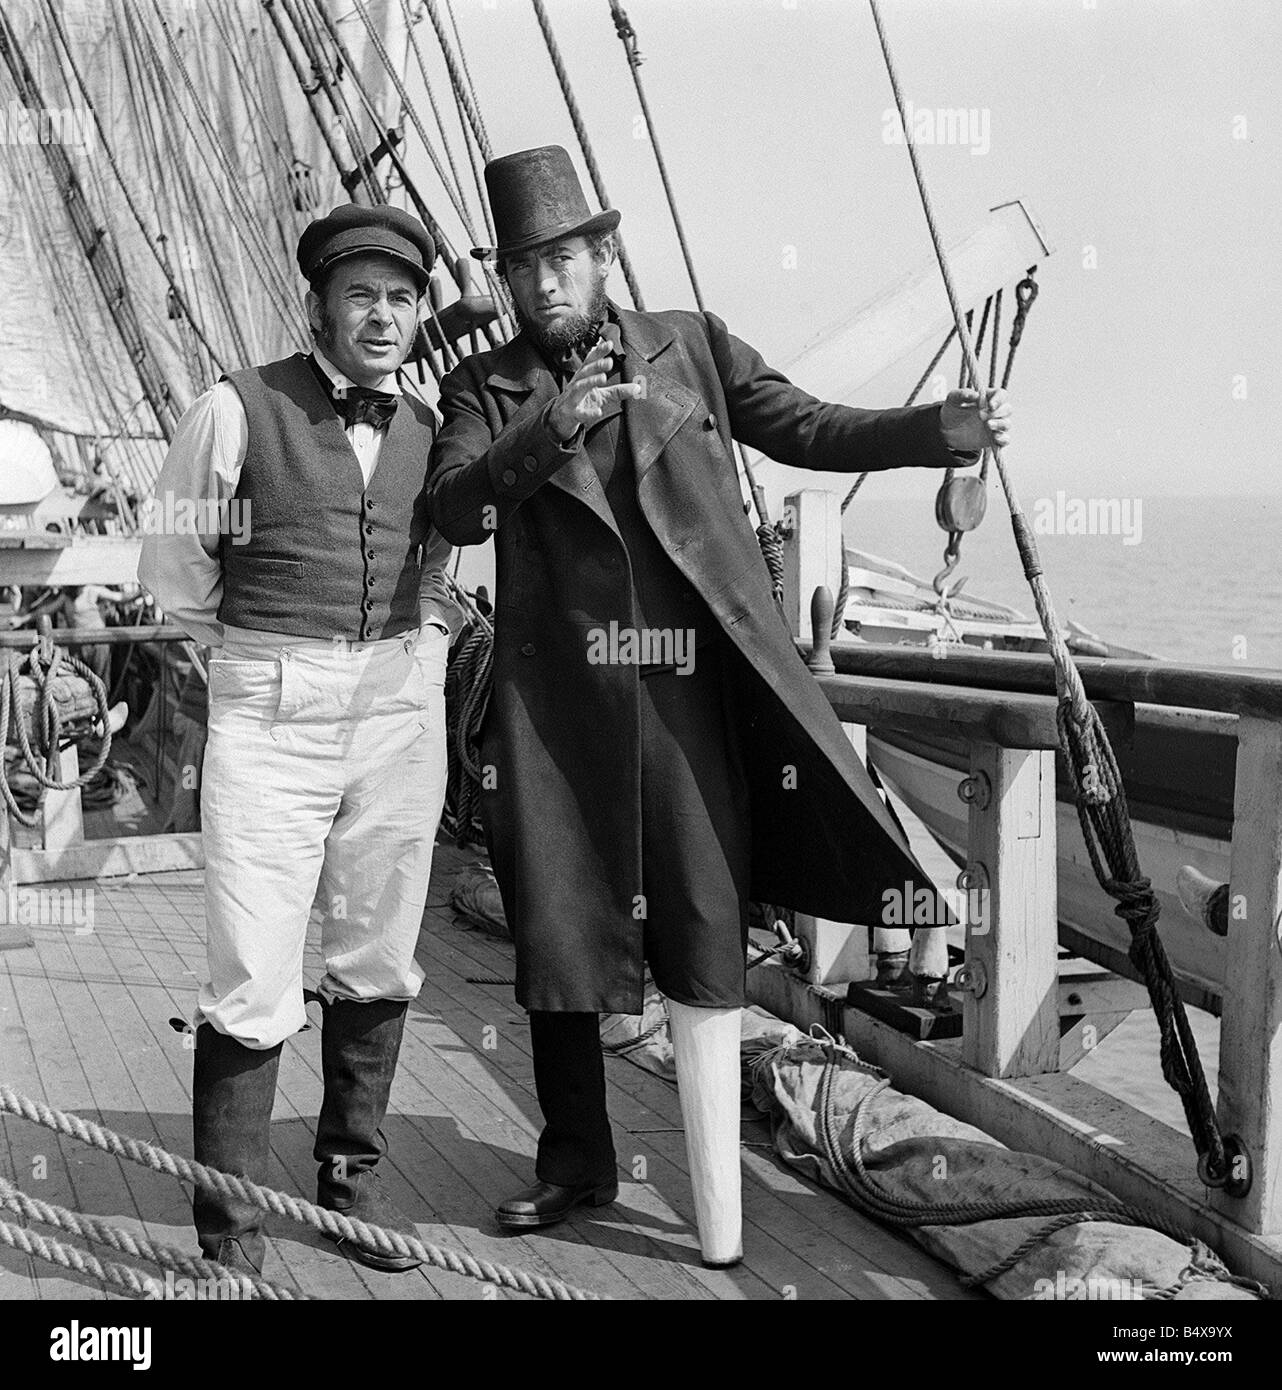 moby-dick-october-1954-filming-at-fishguard-of-herman-melville-s-classic-B4X9YX.jpg